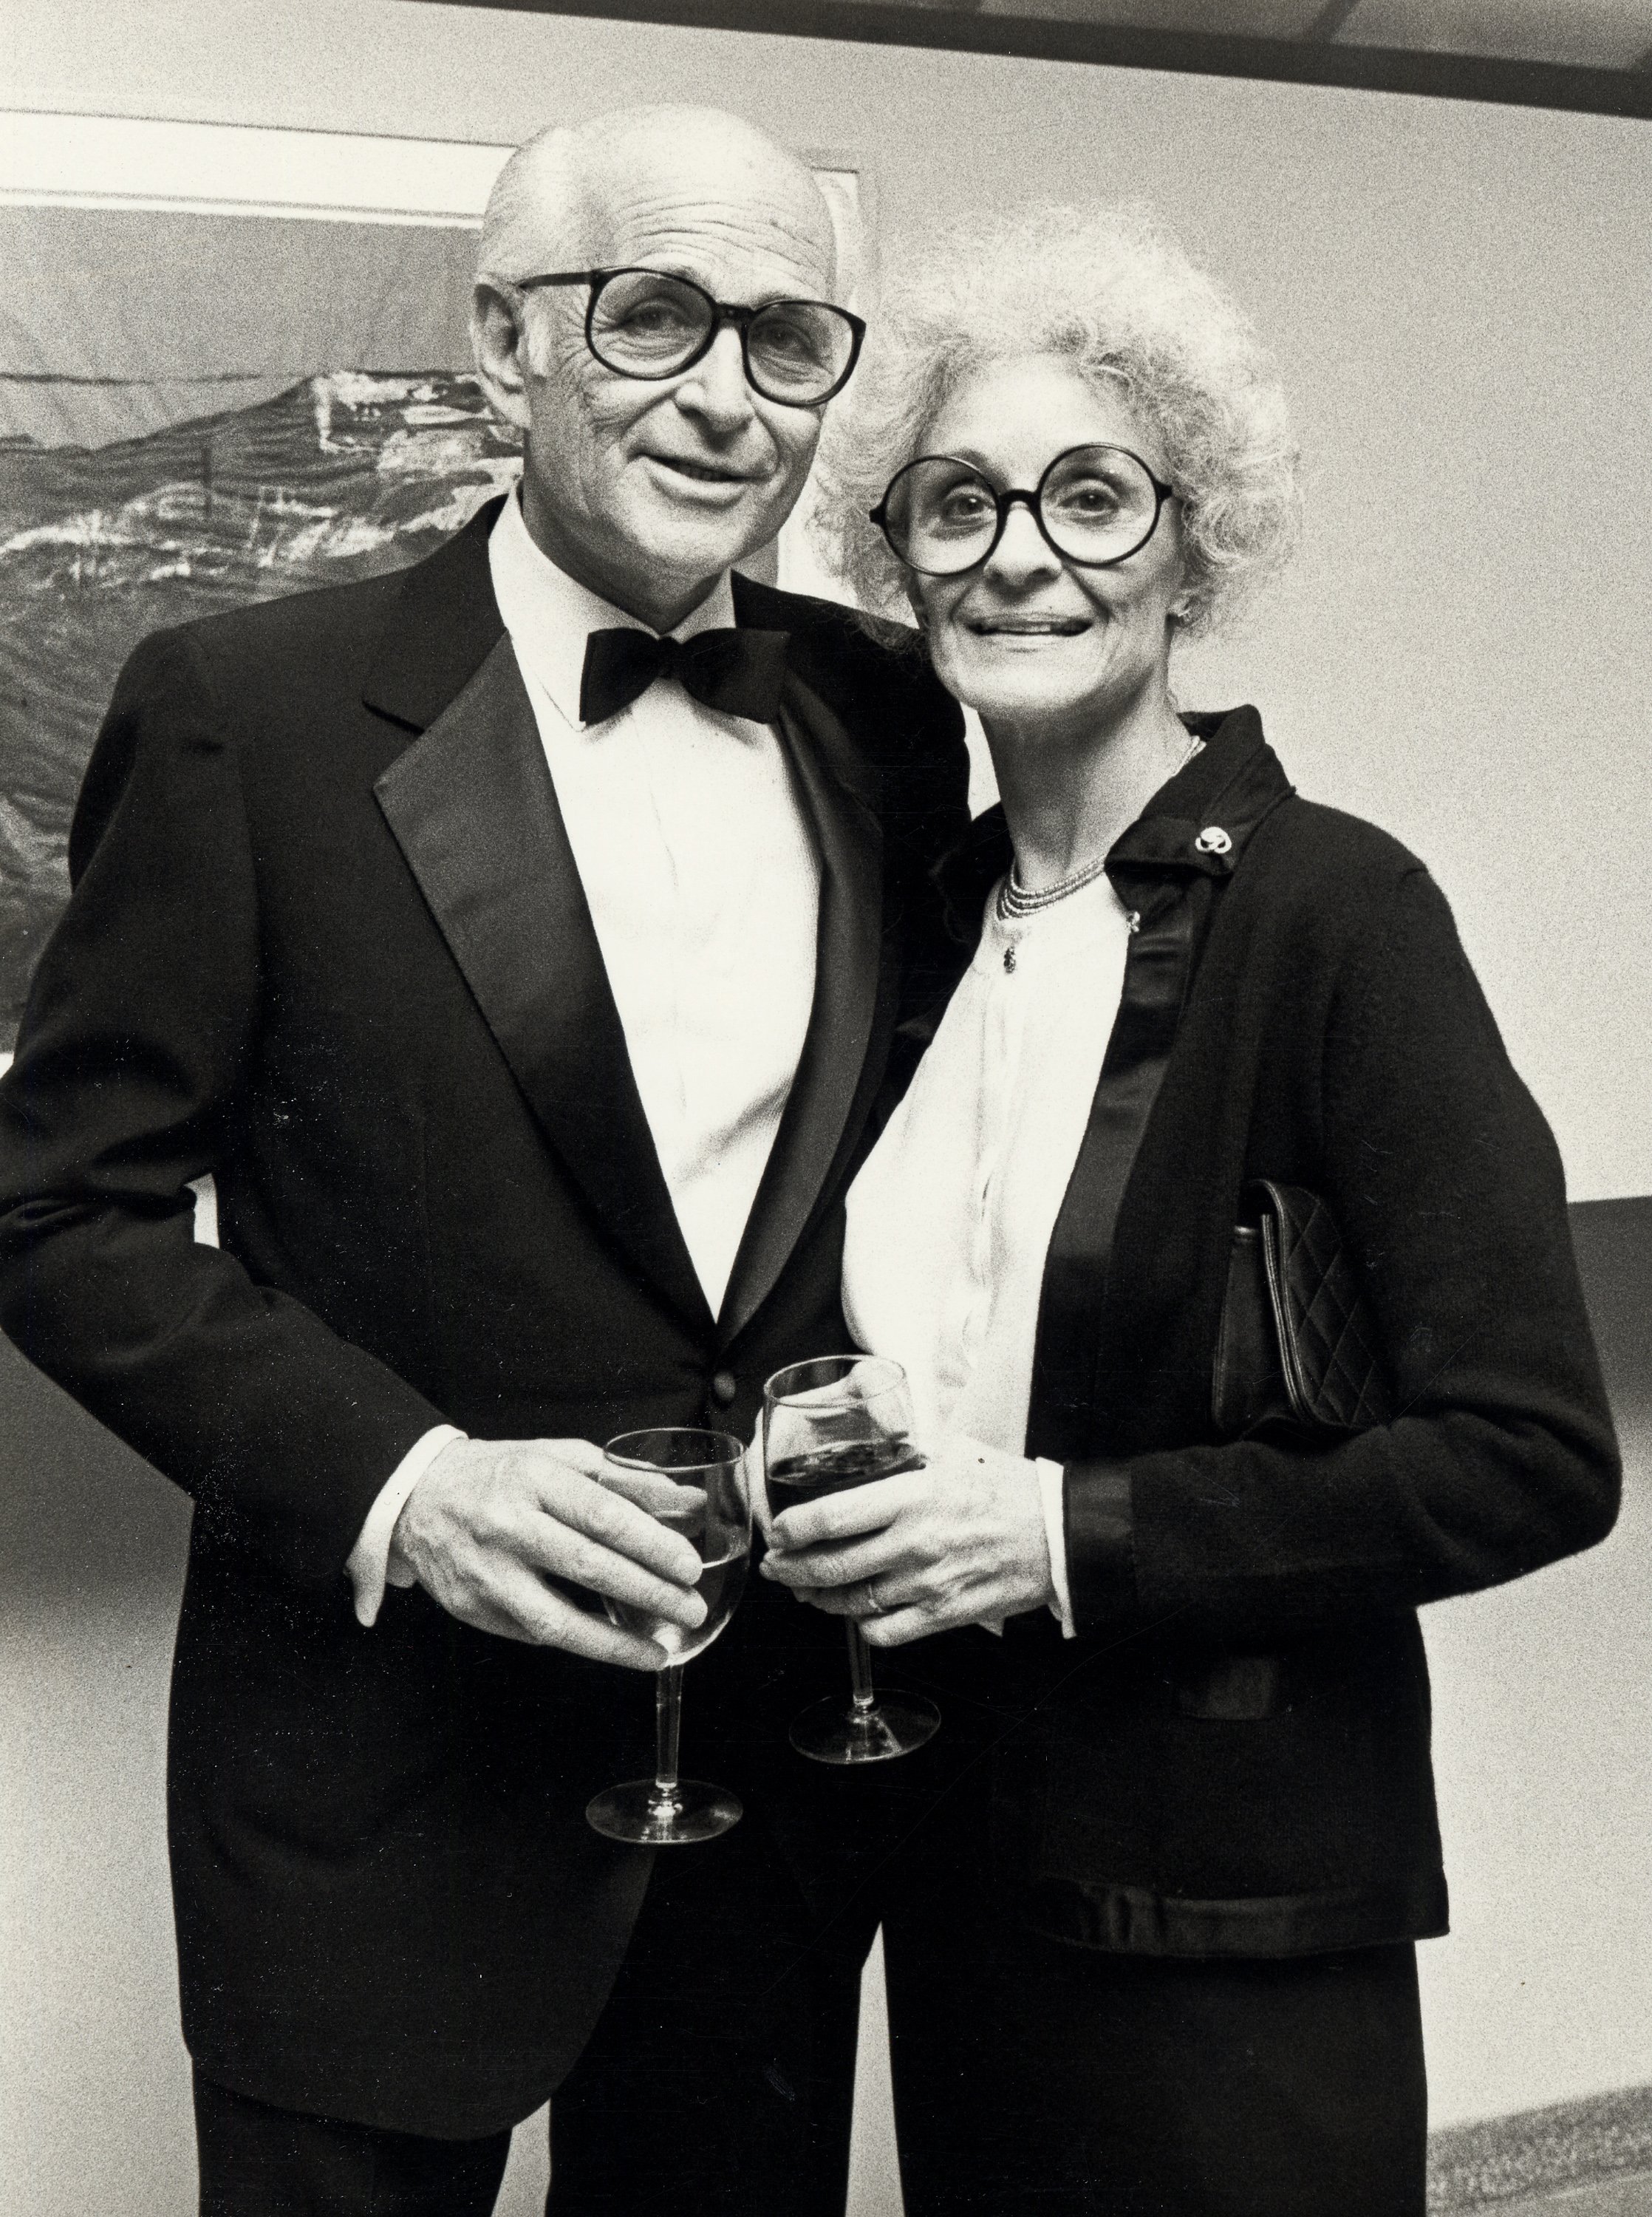 Norman Lear and Frances Loeb attending the opening night of 'Helen Frankenthaler Art Exhibition' on February 20, 1985 at the Guggenheim Museum in New York City, New York. | Source: Getty Images